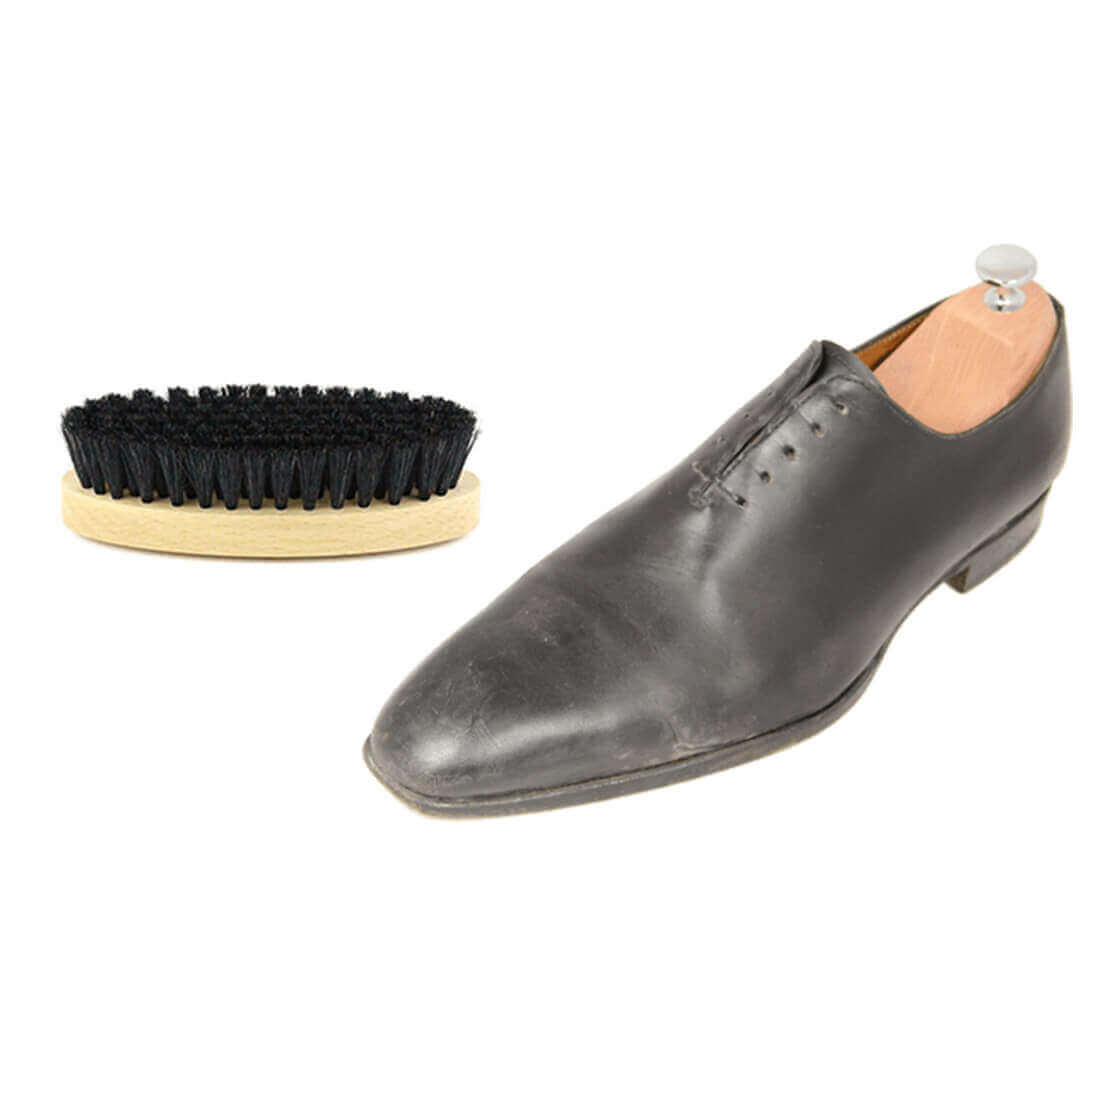 CIRAGE & BROSSES – Finsbury Shoes